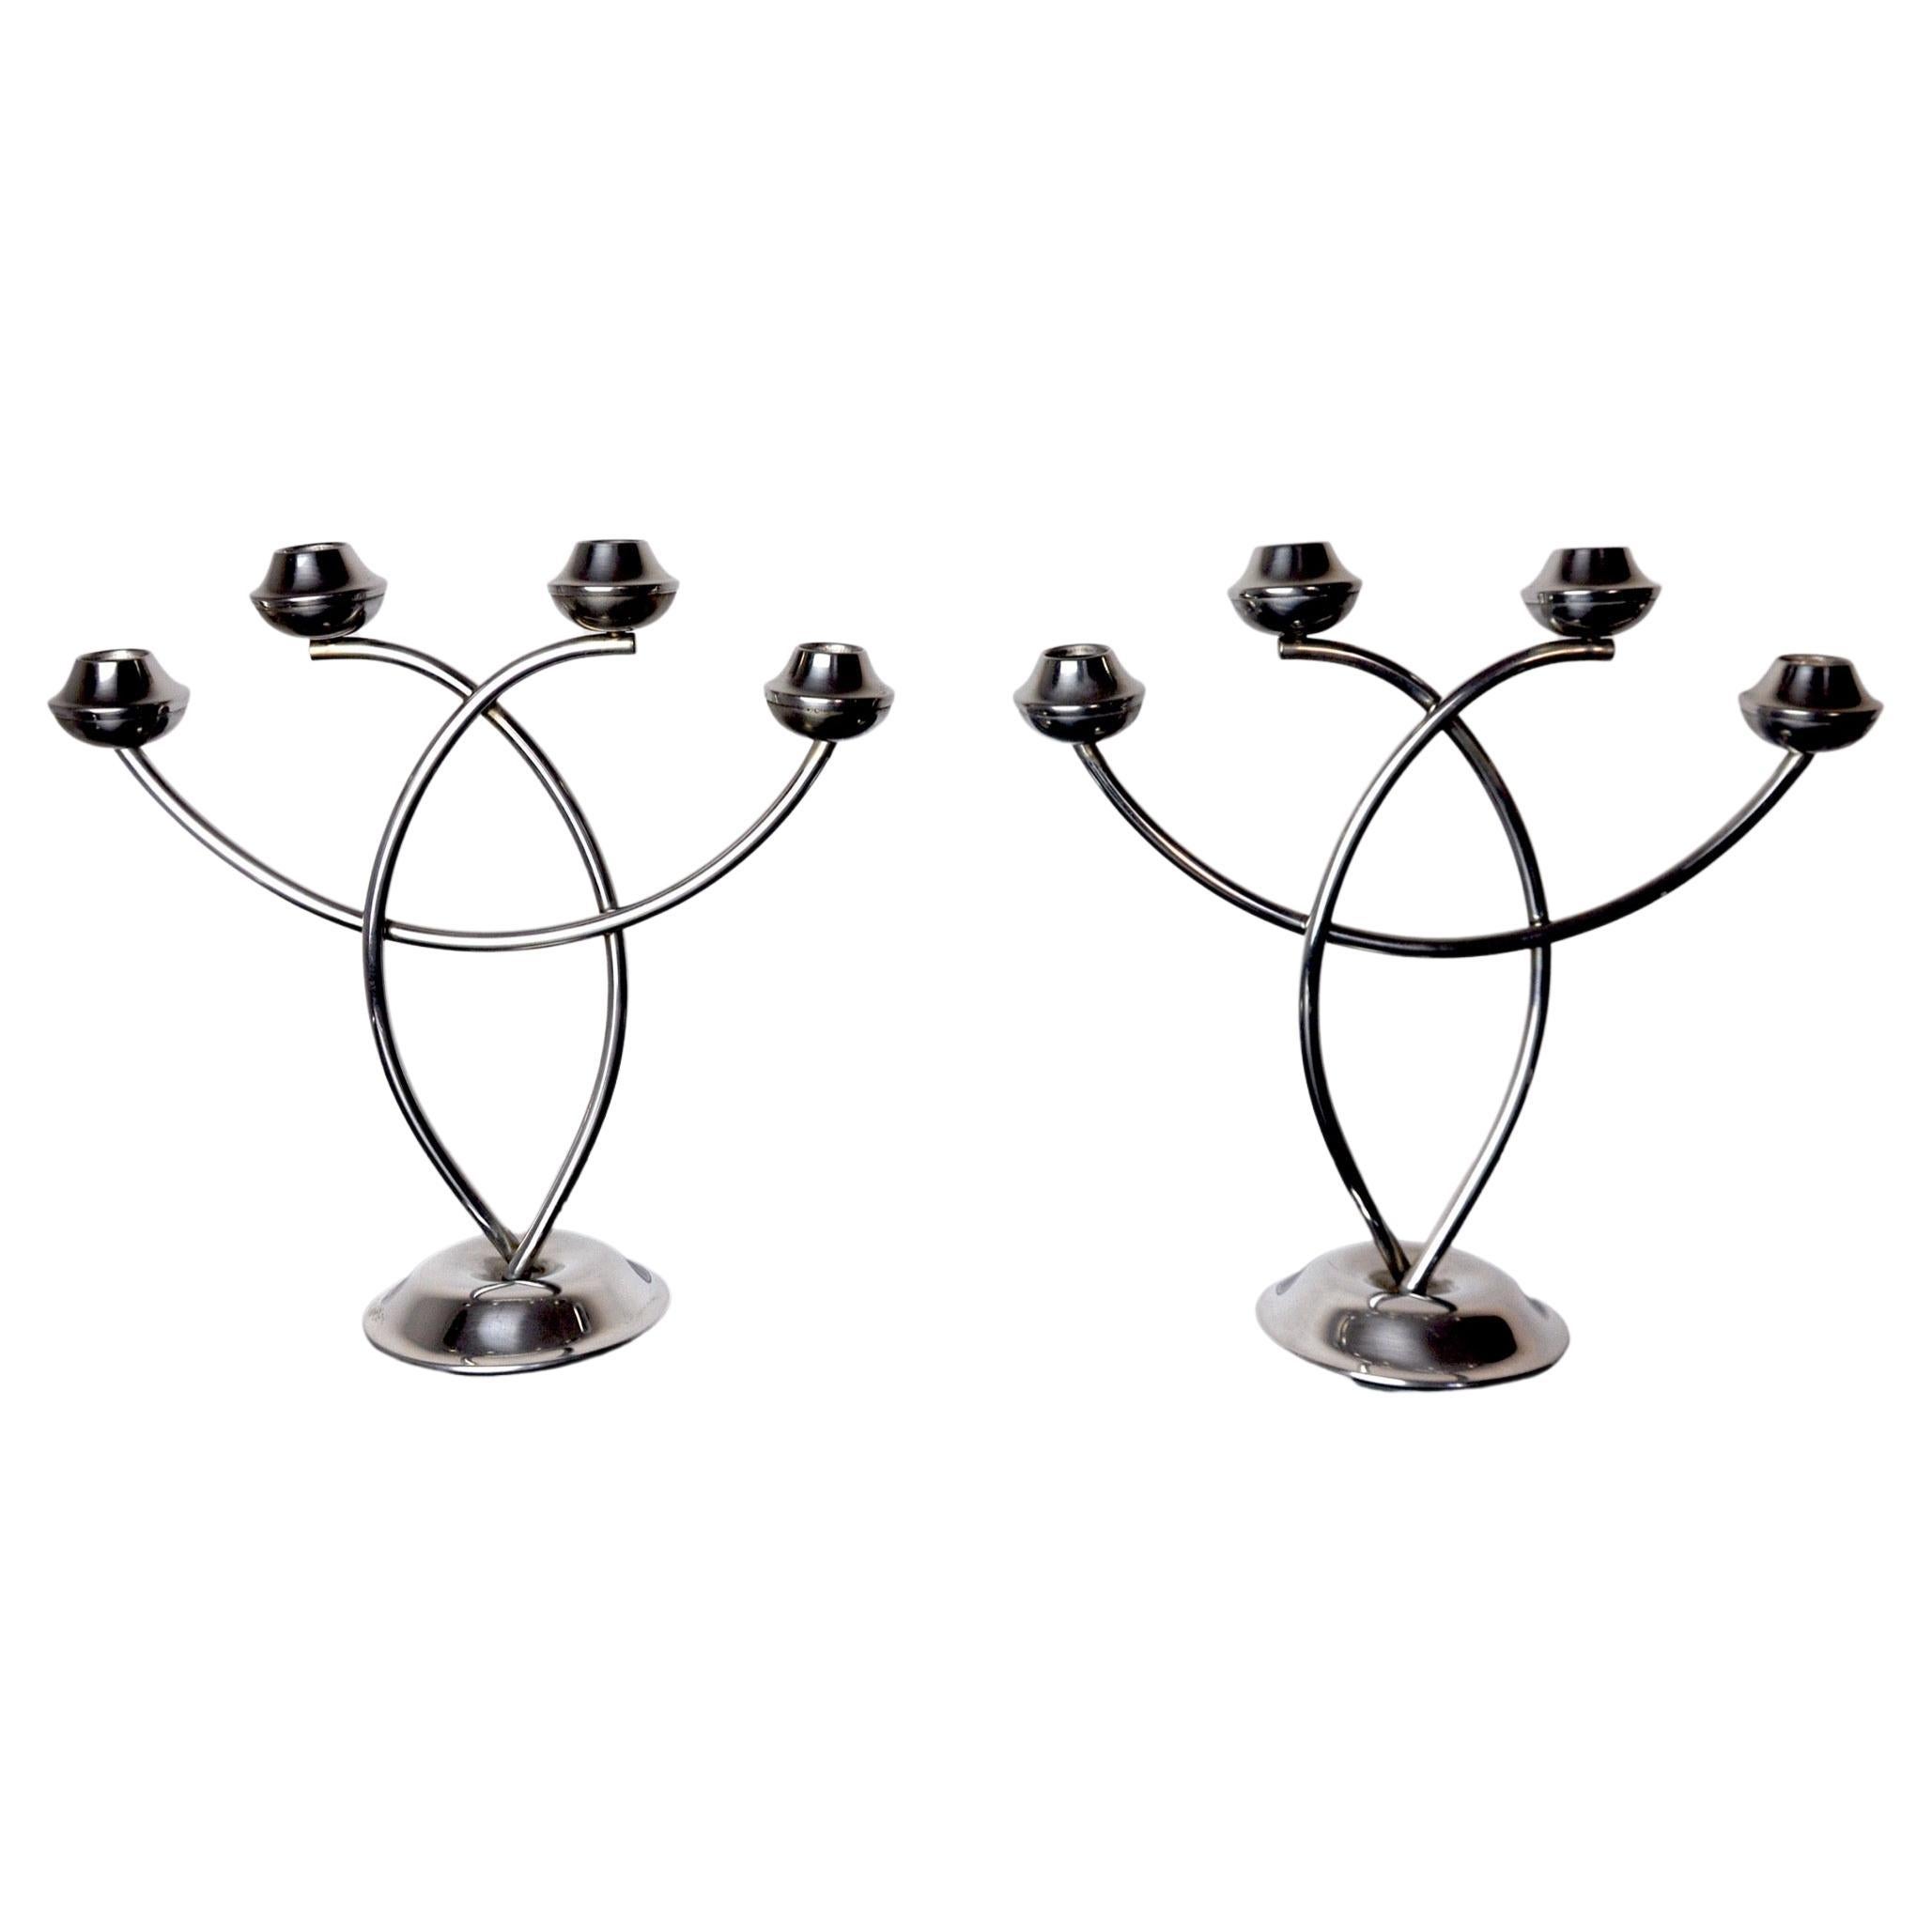 Pair of Art Deco Candle Holder in Stainless Steel 4 Flammes, Spain, 1970